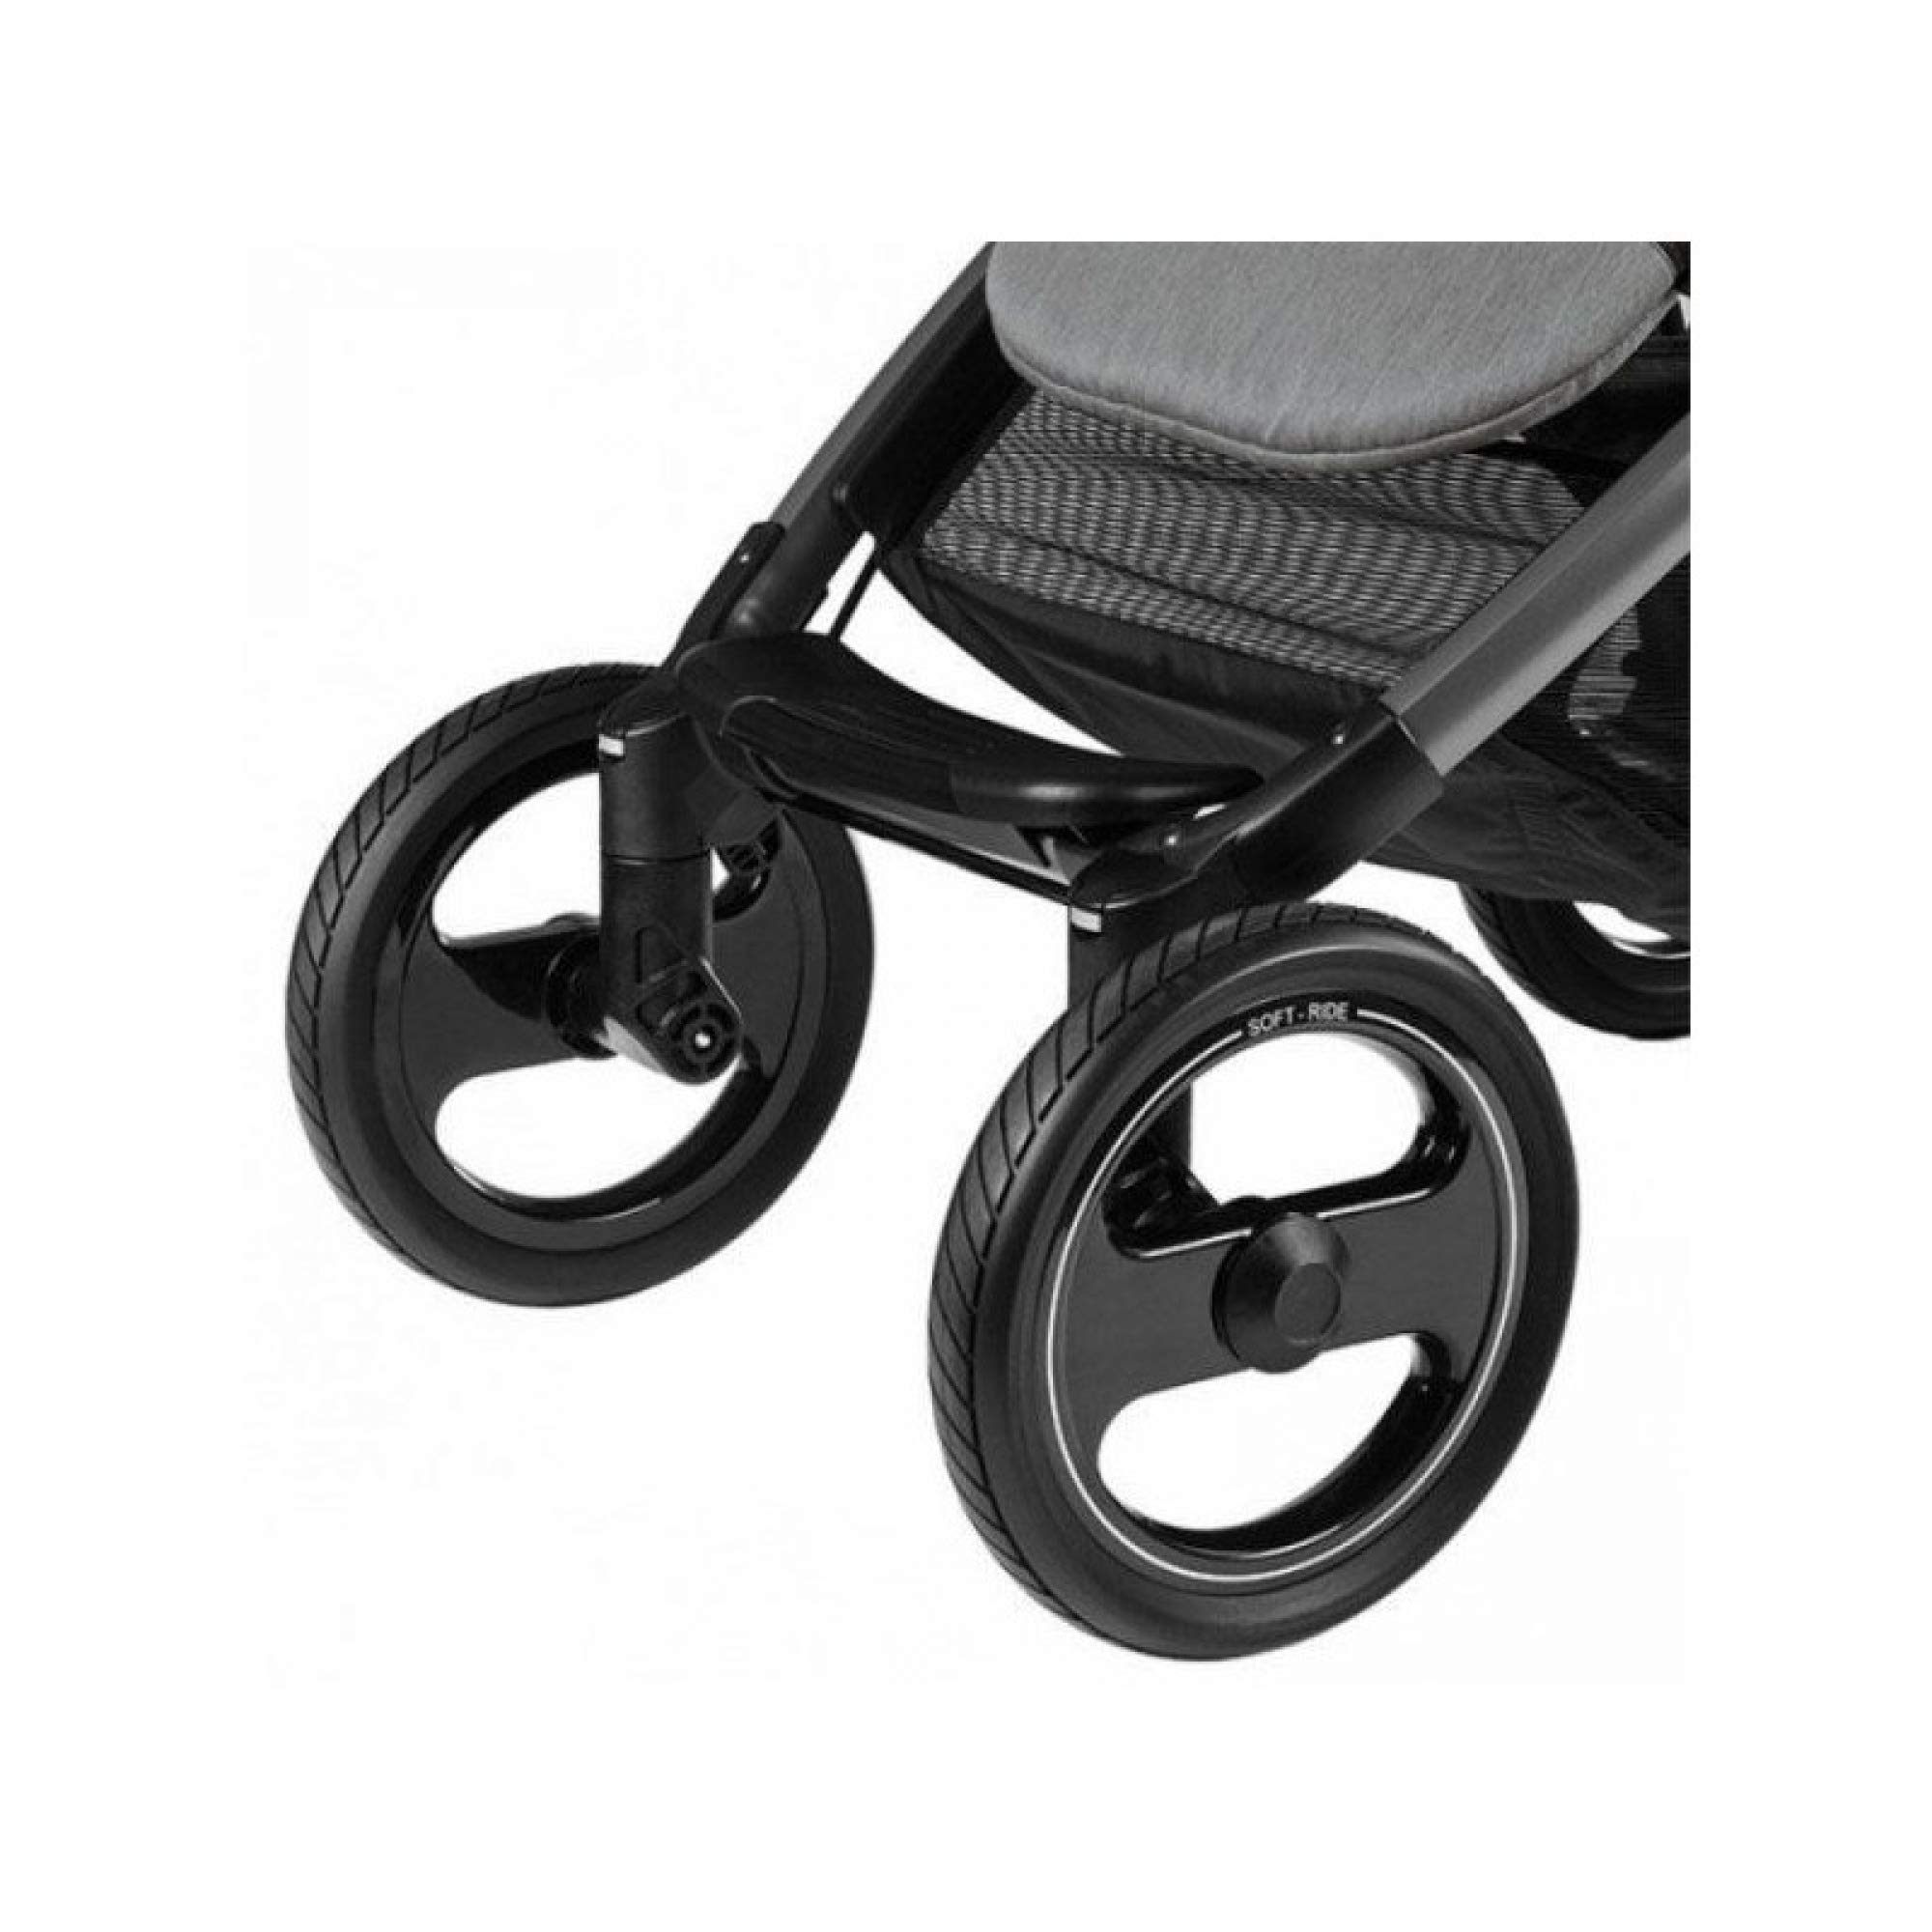 Peg Perego Stroller Off-Road Wheels - Accessory - Compatible with Ypsi, Book Pop-Up, and Booklet Strollers